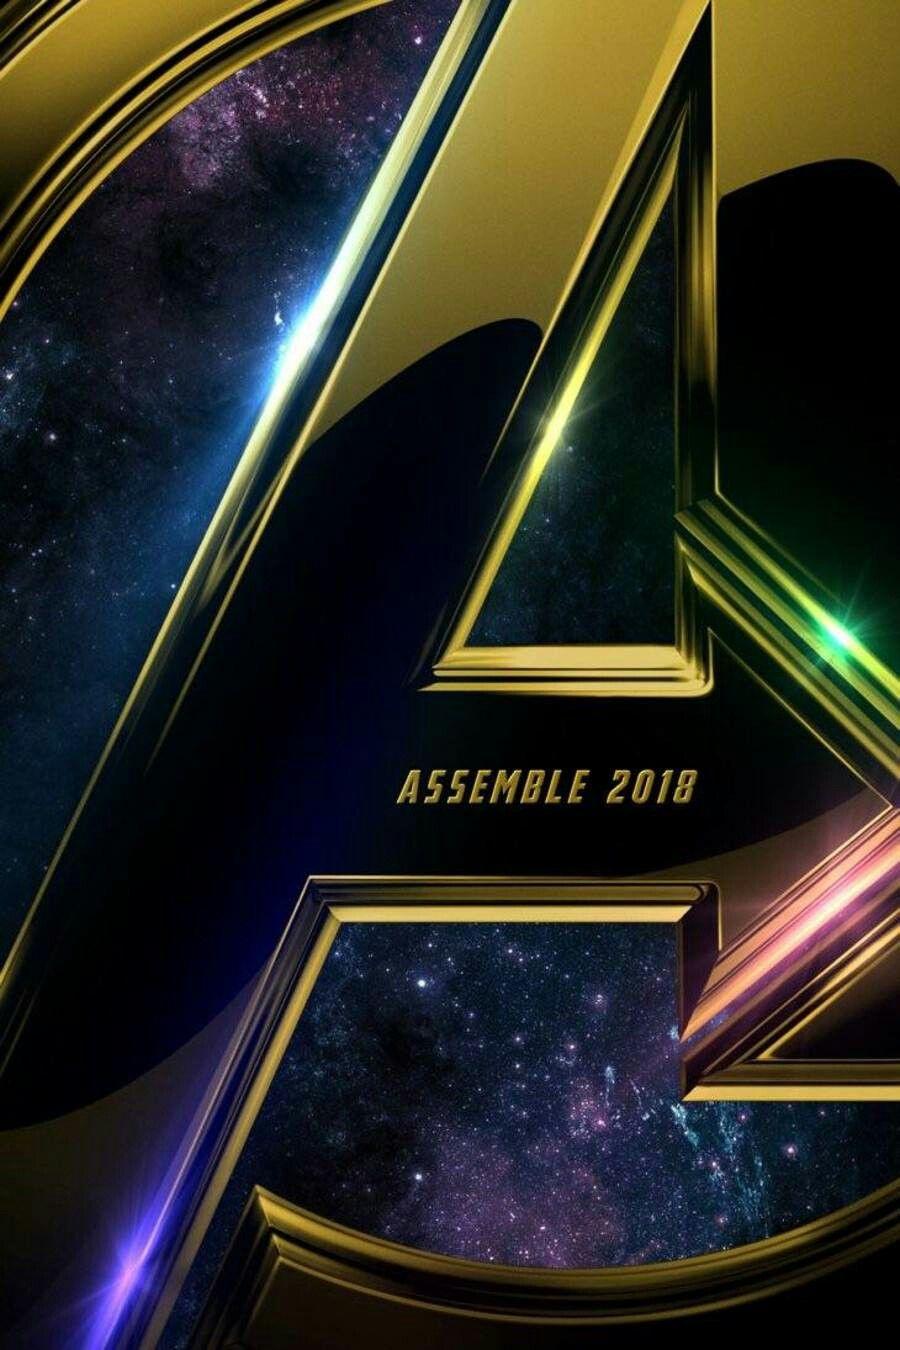 Avengers Infinity War Logo - Newest poster of avengers infinity war featuring the avengers logo